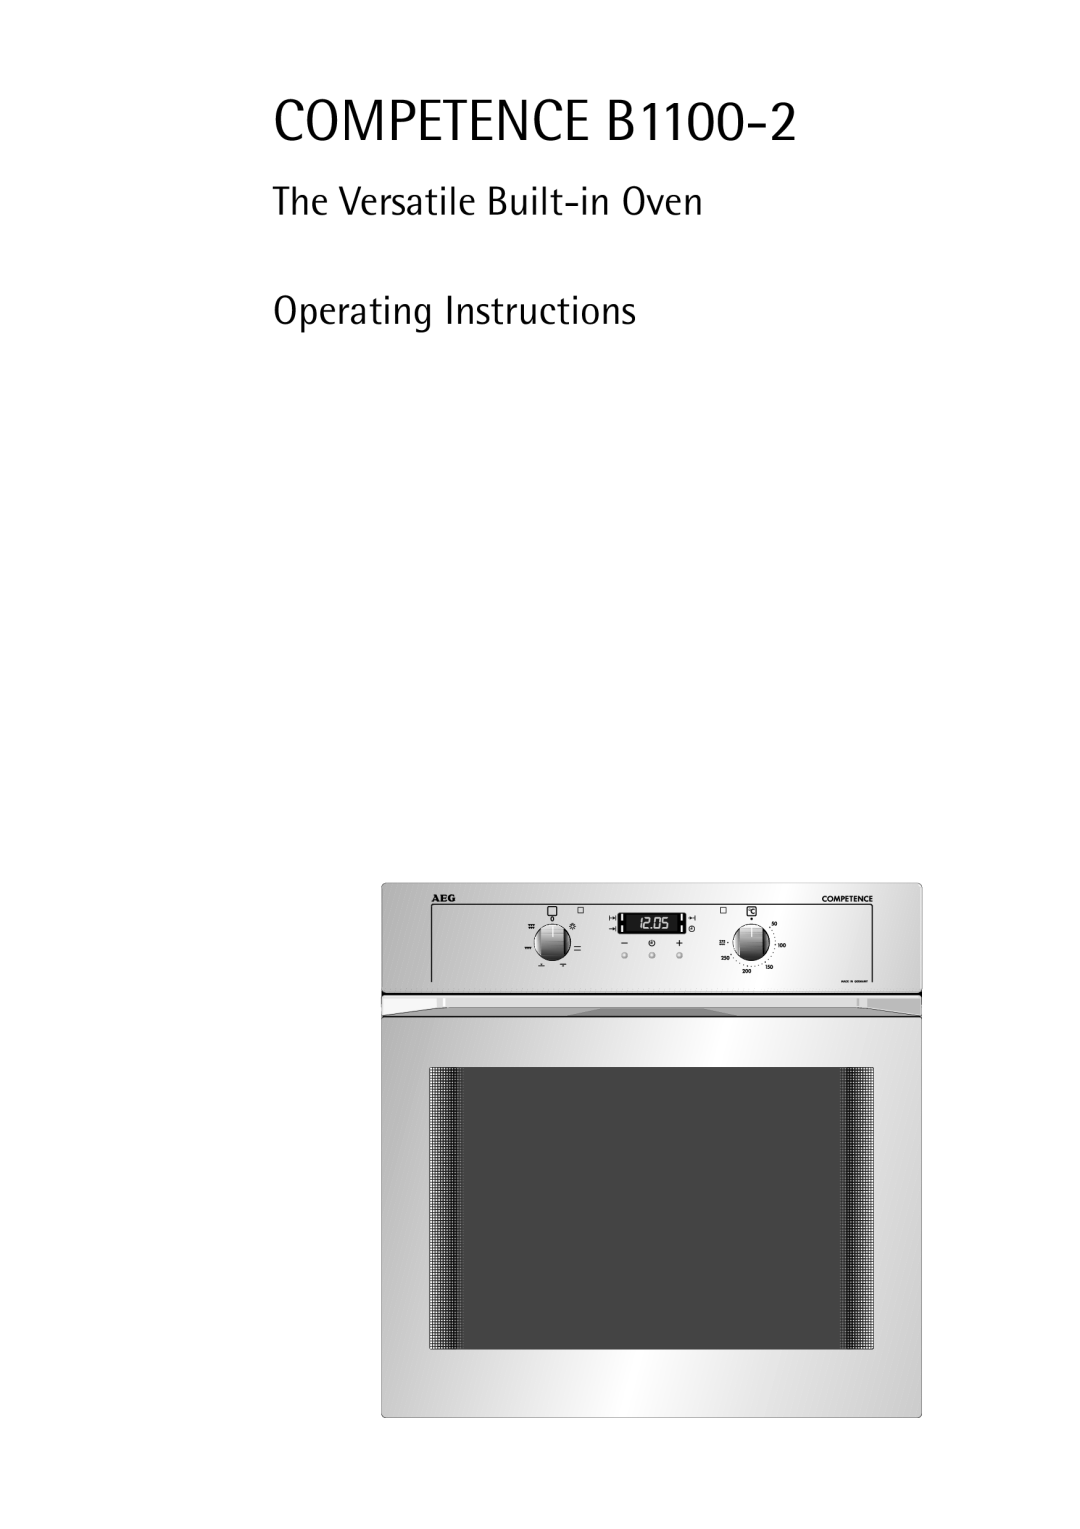 Electrolux manual The Versatile Built-in Oven Operating Instructions, COMPETENCE B1100-2 